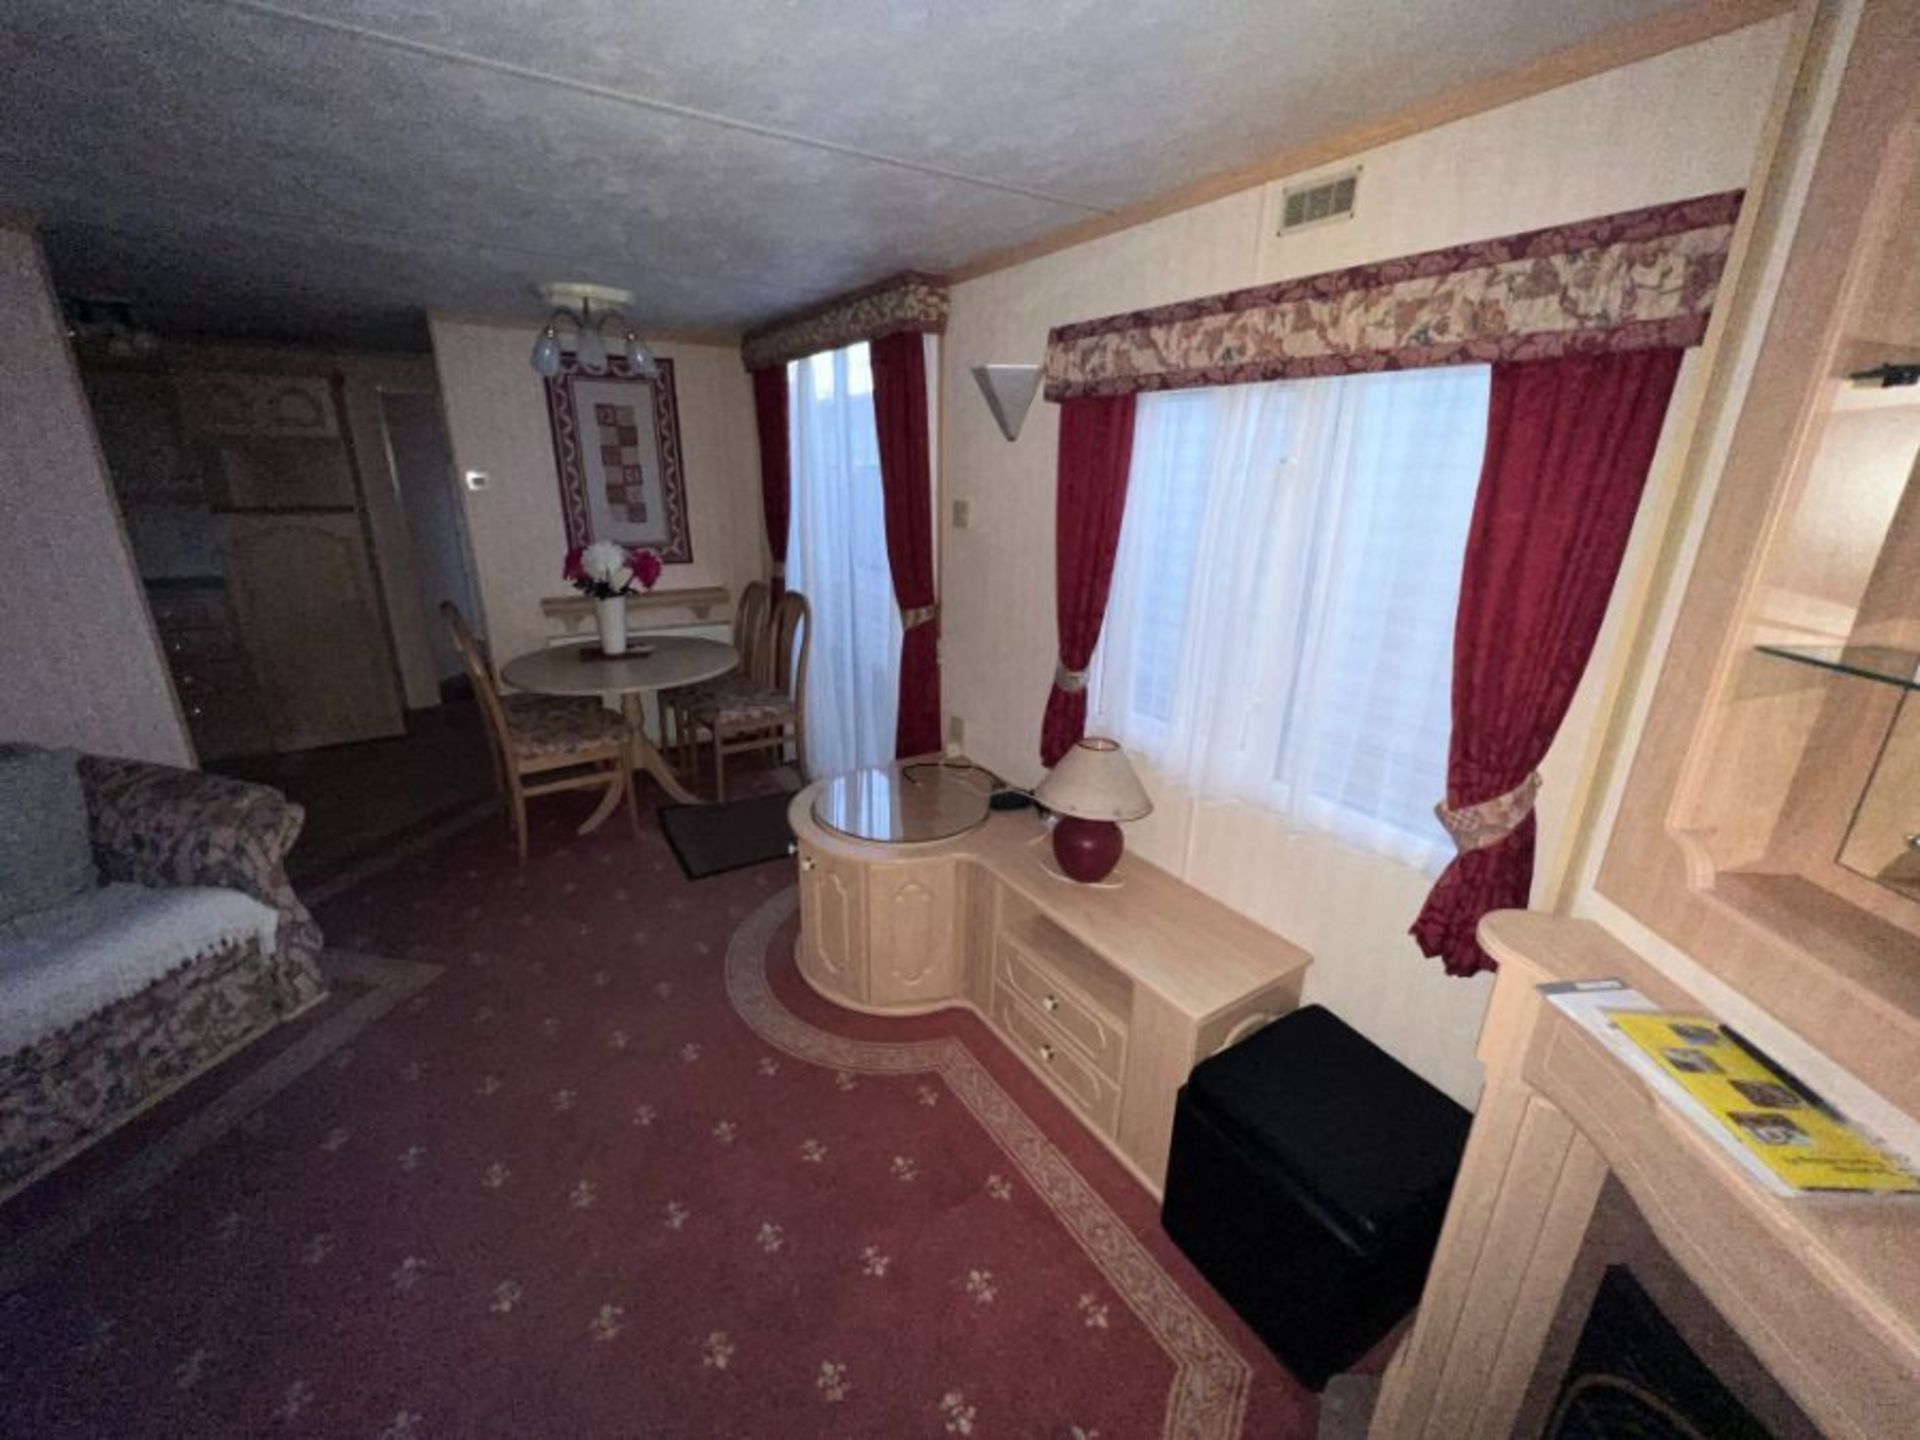 WILLERBY LYNDHURST 37FT X 12FT, 2 BEDROOM STATIC CARAVAN DOUBLE GLAZED & CENTRAL HEATING - LOCATED - Image 18 of 50